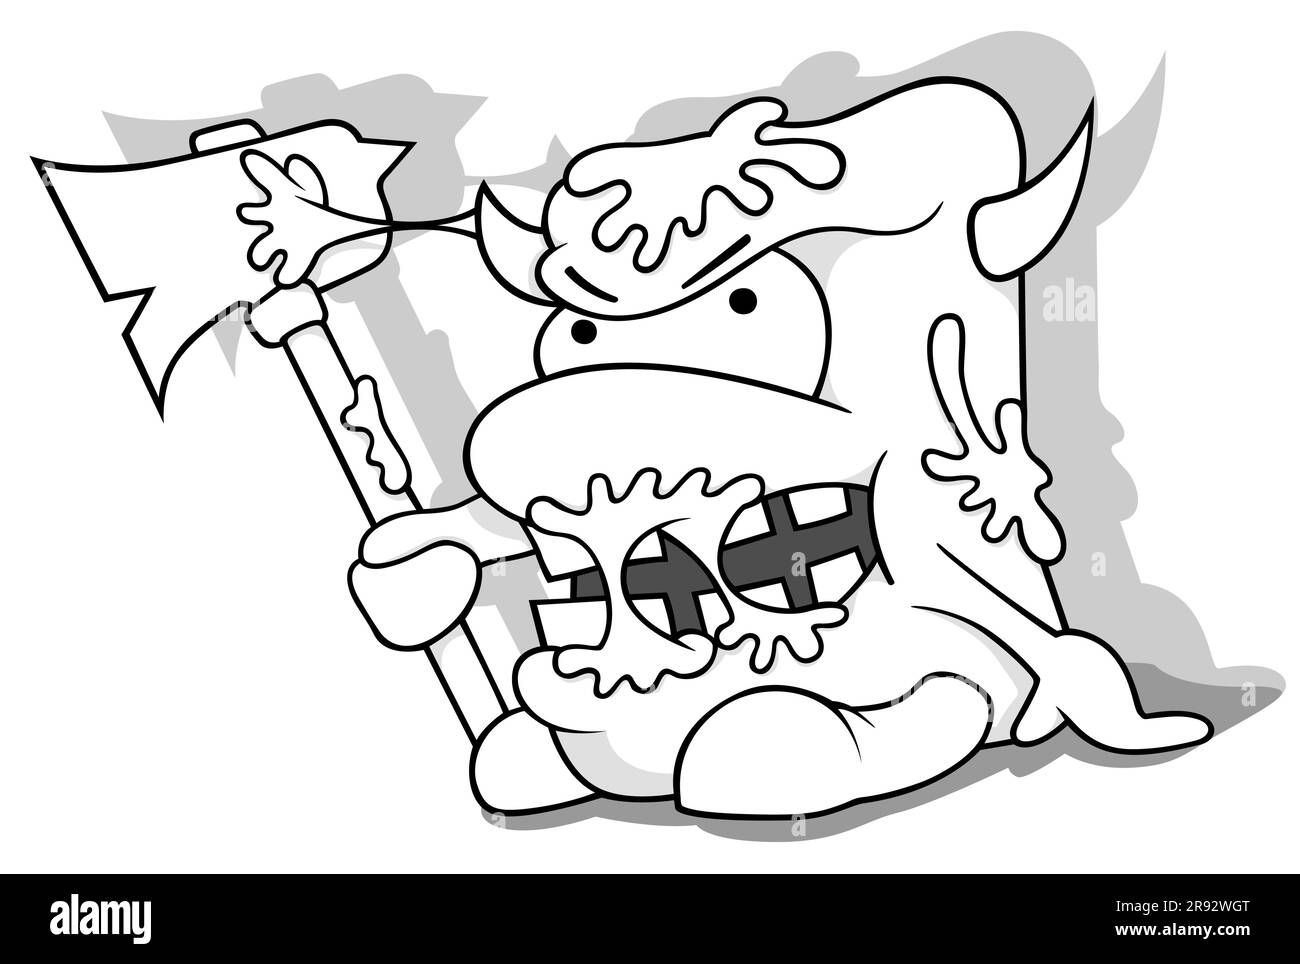 Drawing of a Garbage Monster with an Ax in Hand Stock Vector